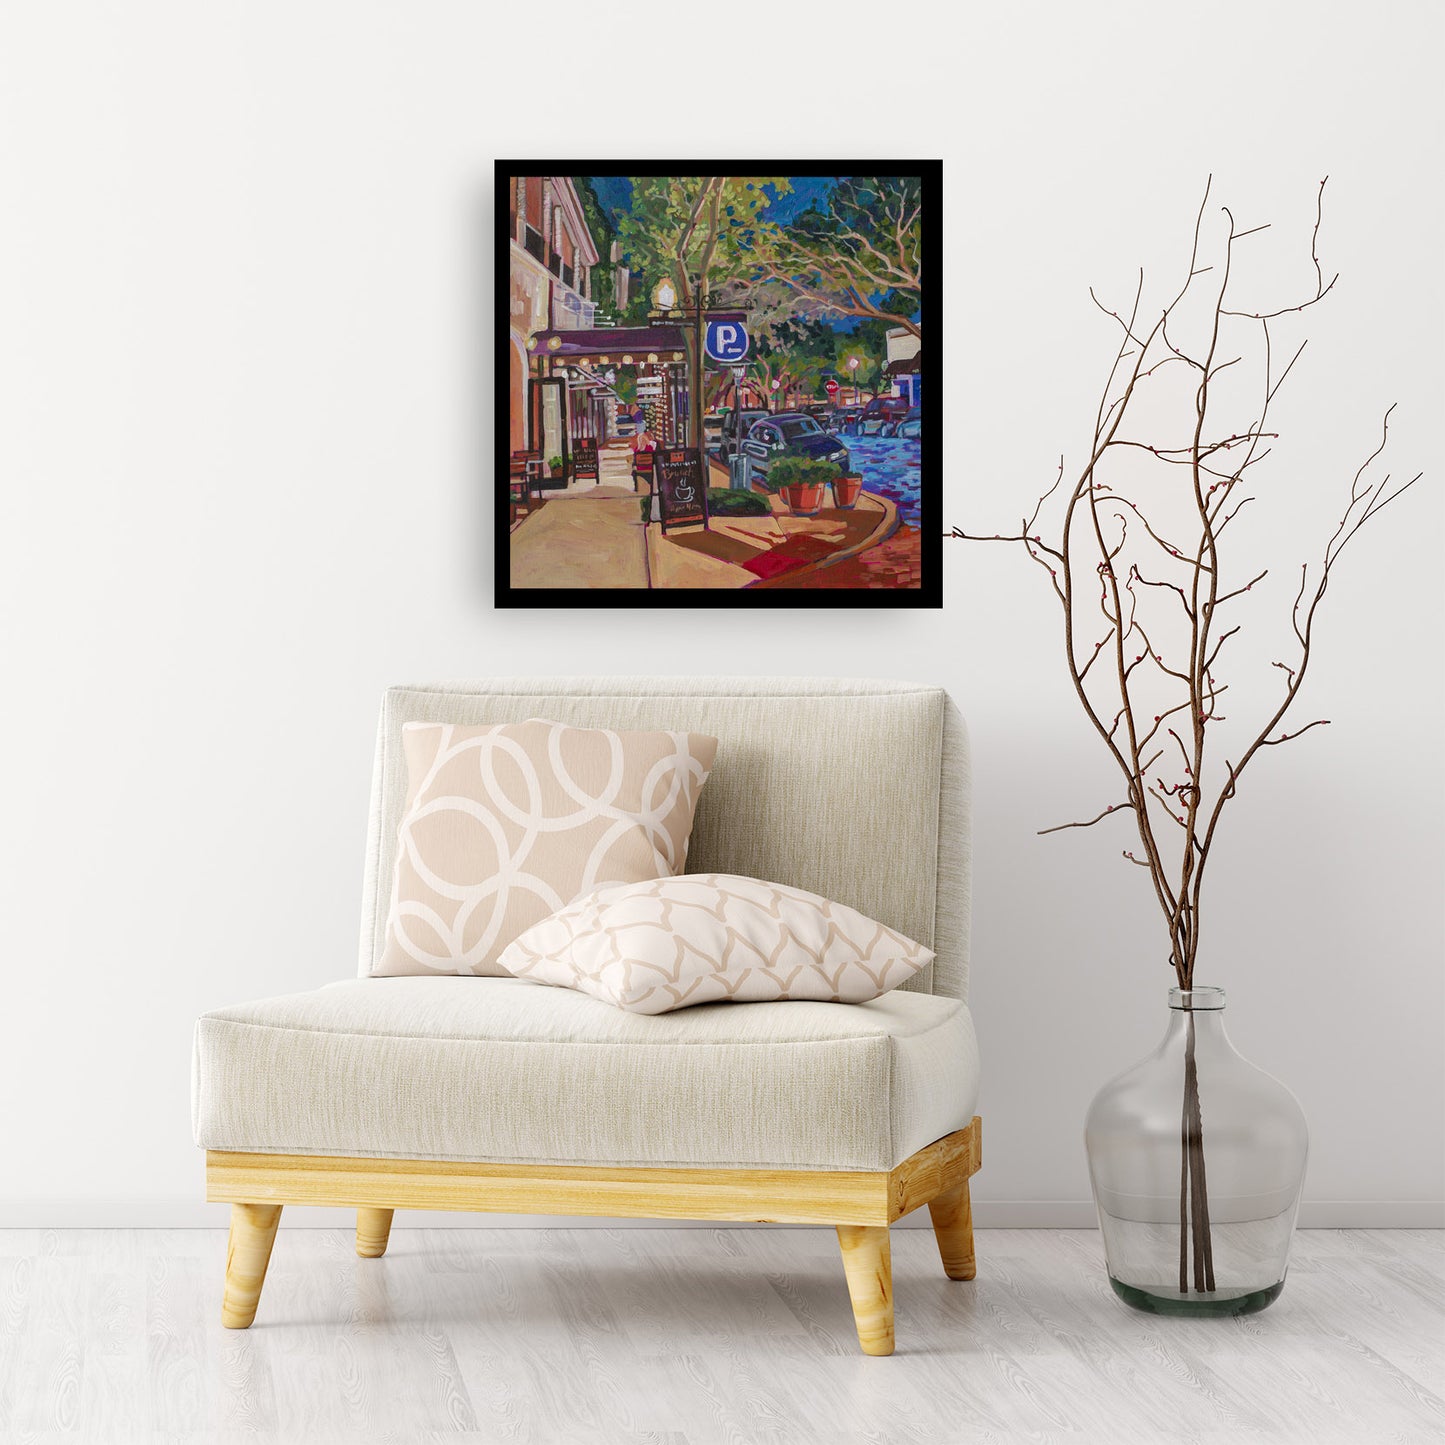 Product shot of painting with chair for size reference, Winter Park Nightlife 6 painting 20x20 inches vibrant street scene with dramatic light on tree lined street at night